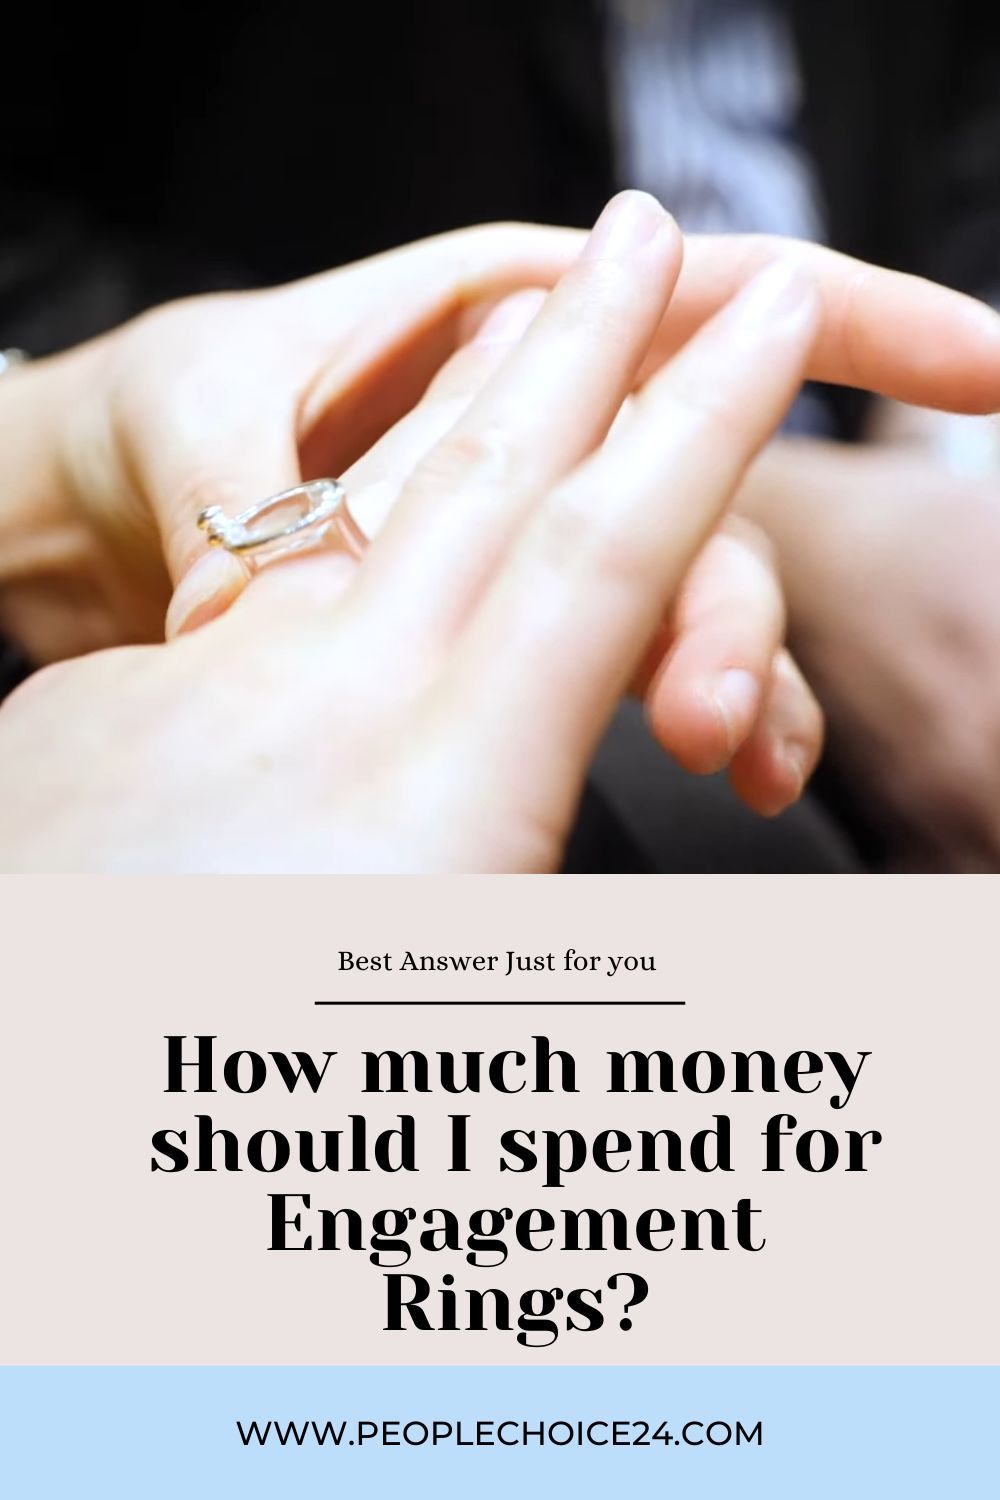 How much money should I spend for Engagement Rings